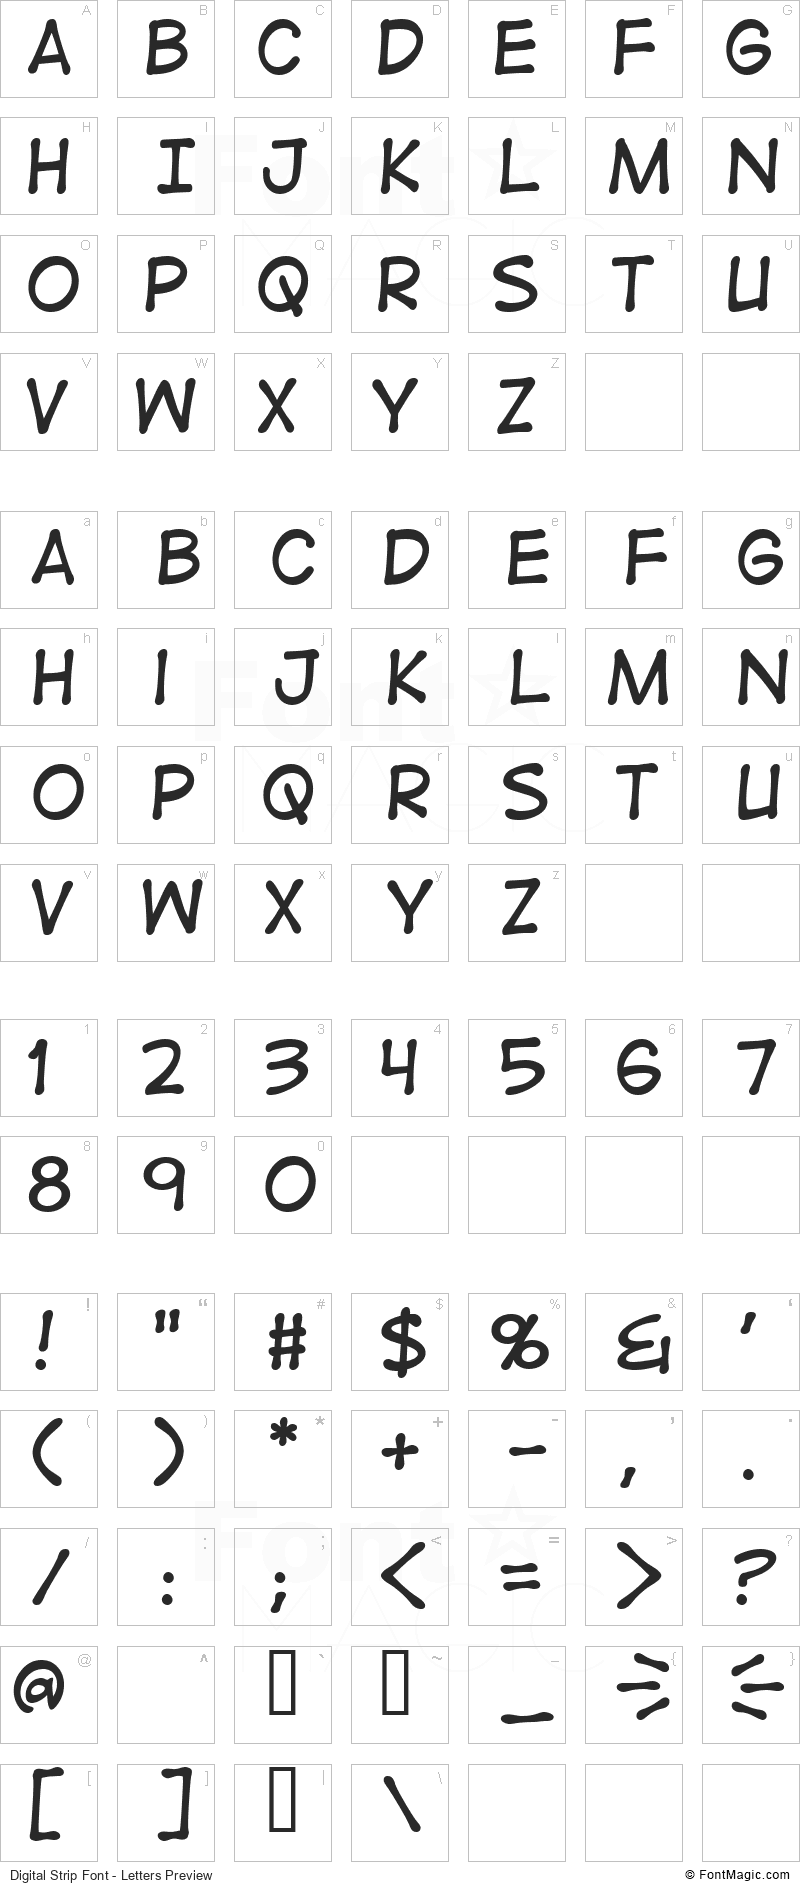 Digital Strip Font - All Latters Preview Chart